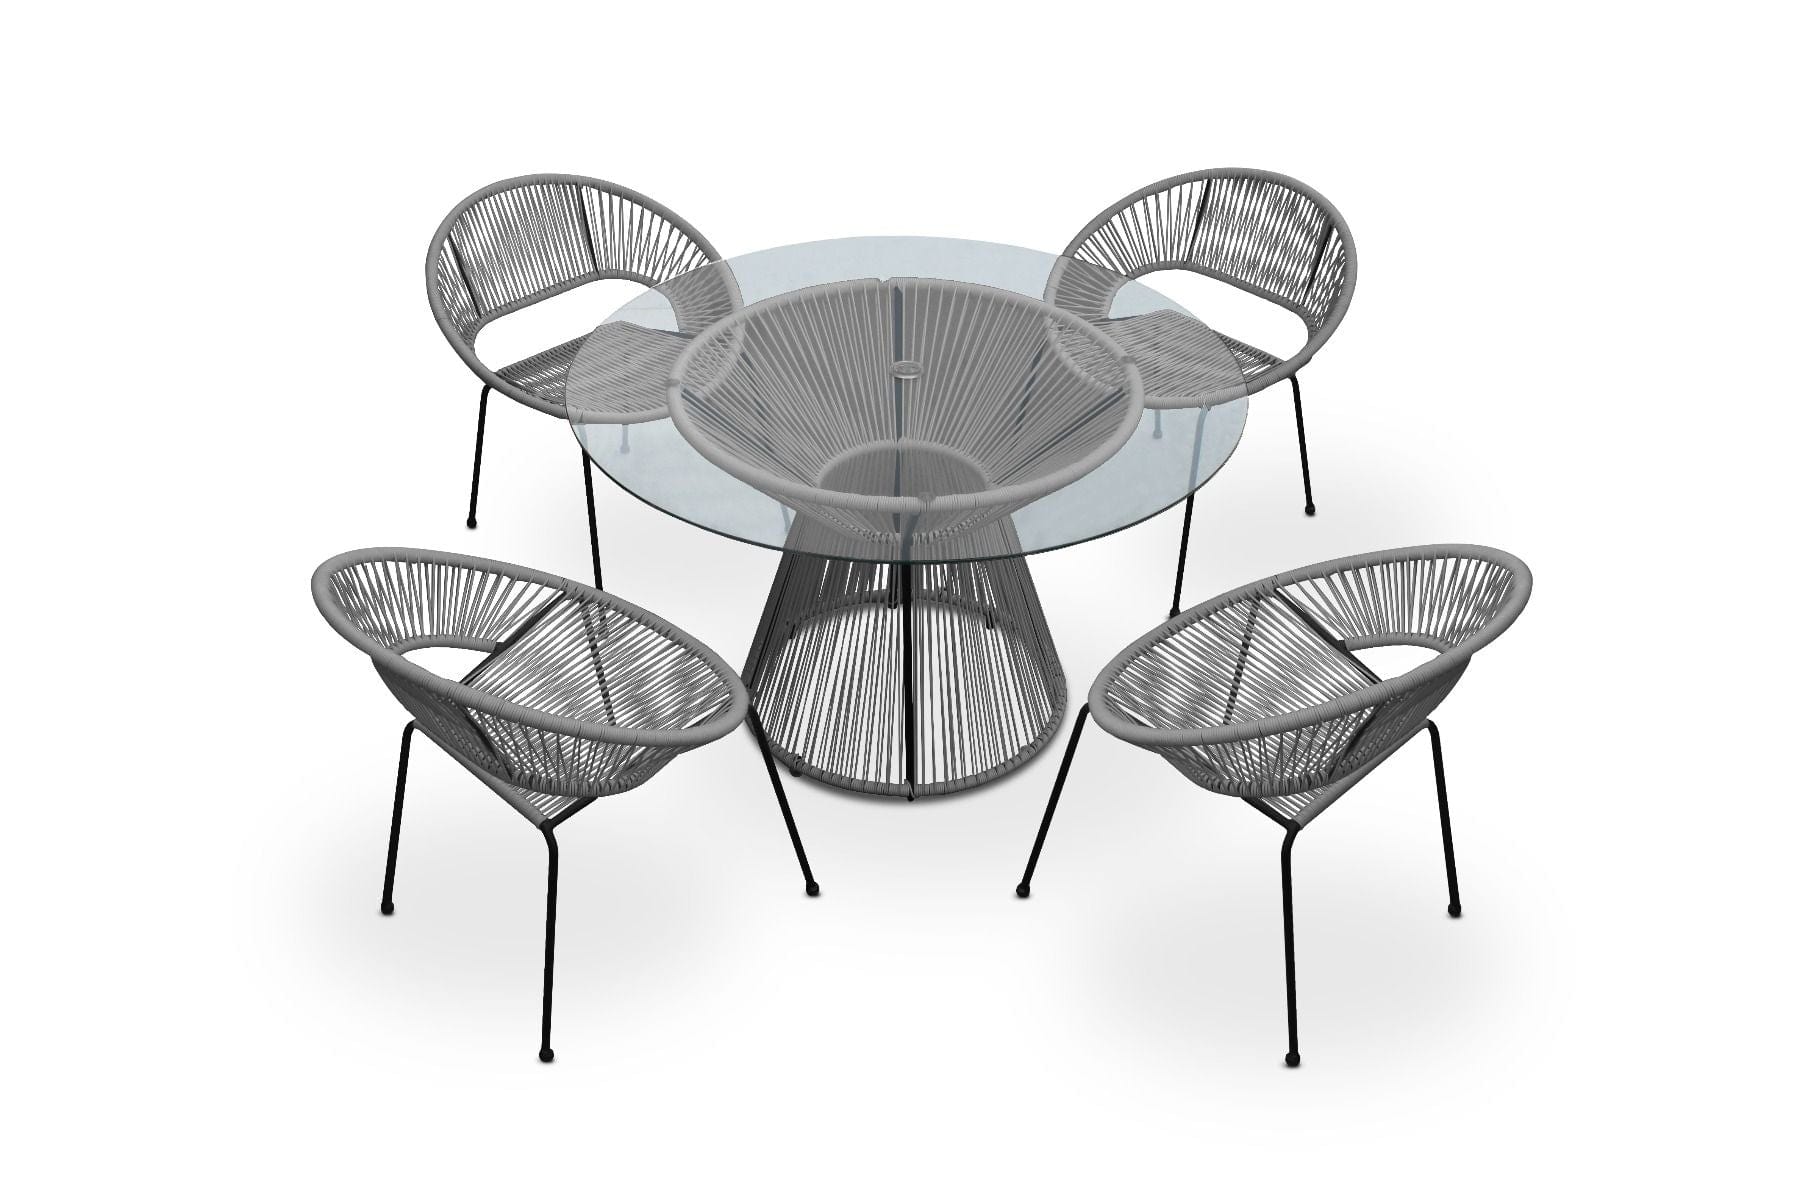 Harmonia Living Outdoor Dining Set Harmonia Living - Acapulco 5 Piece Dining Set - Table and Four Dining Chairs | HL-ACA-5DS